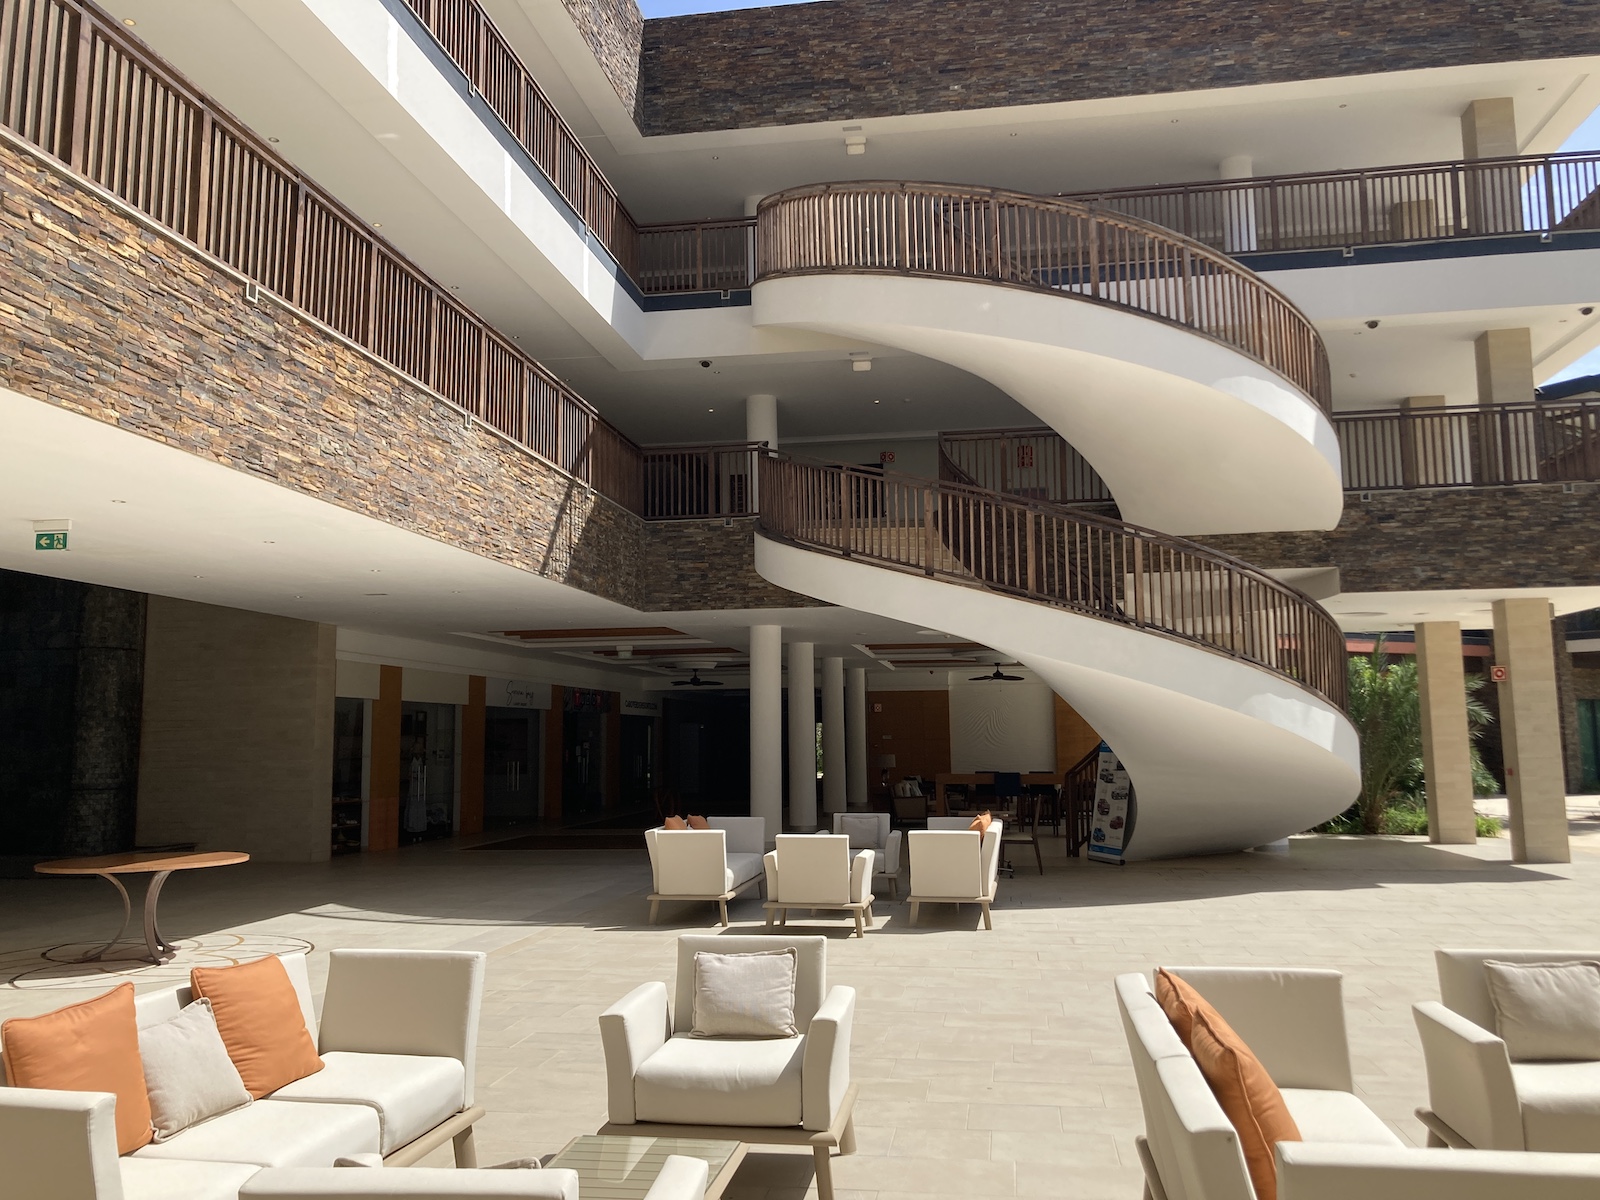 Hilton Sal Cabo Verde Hotel Review – Might Be My New Favorite Hotel